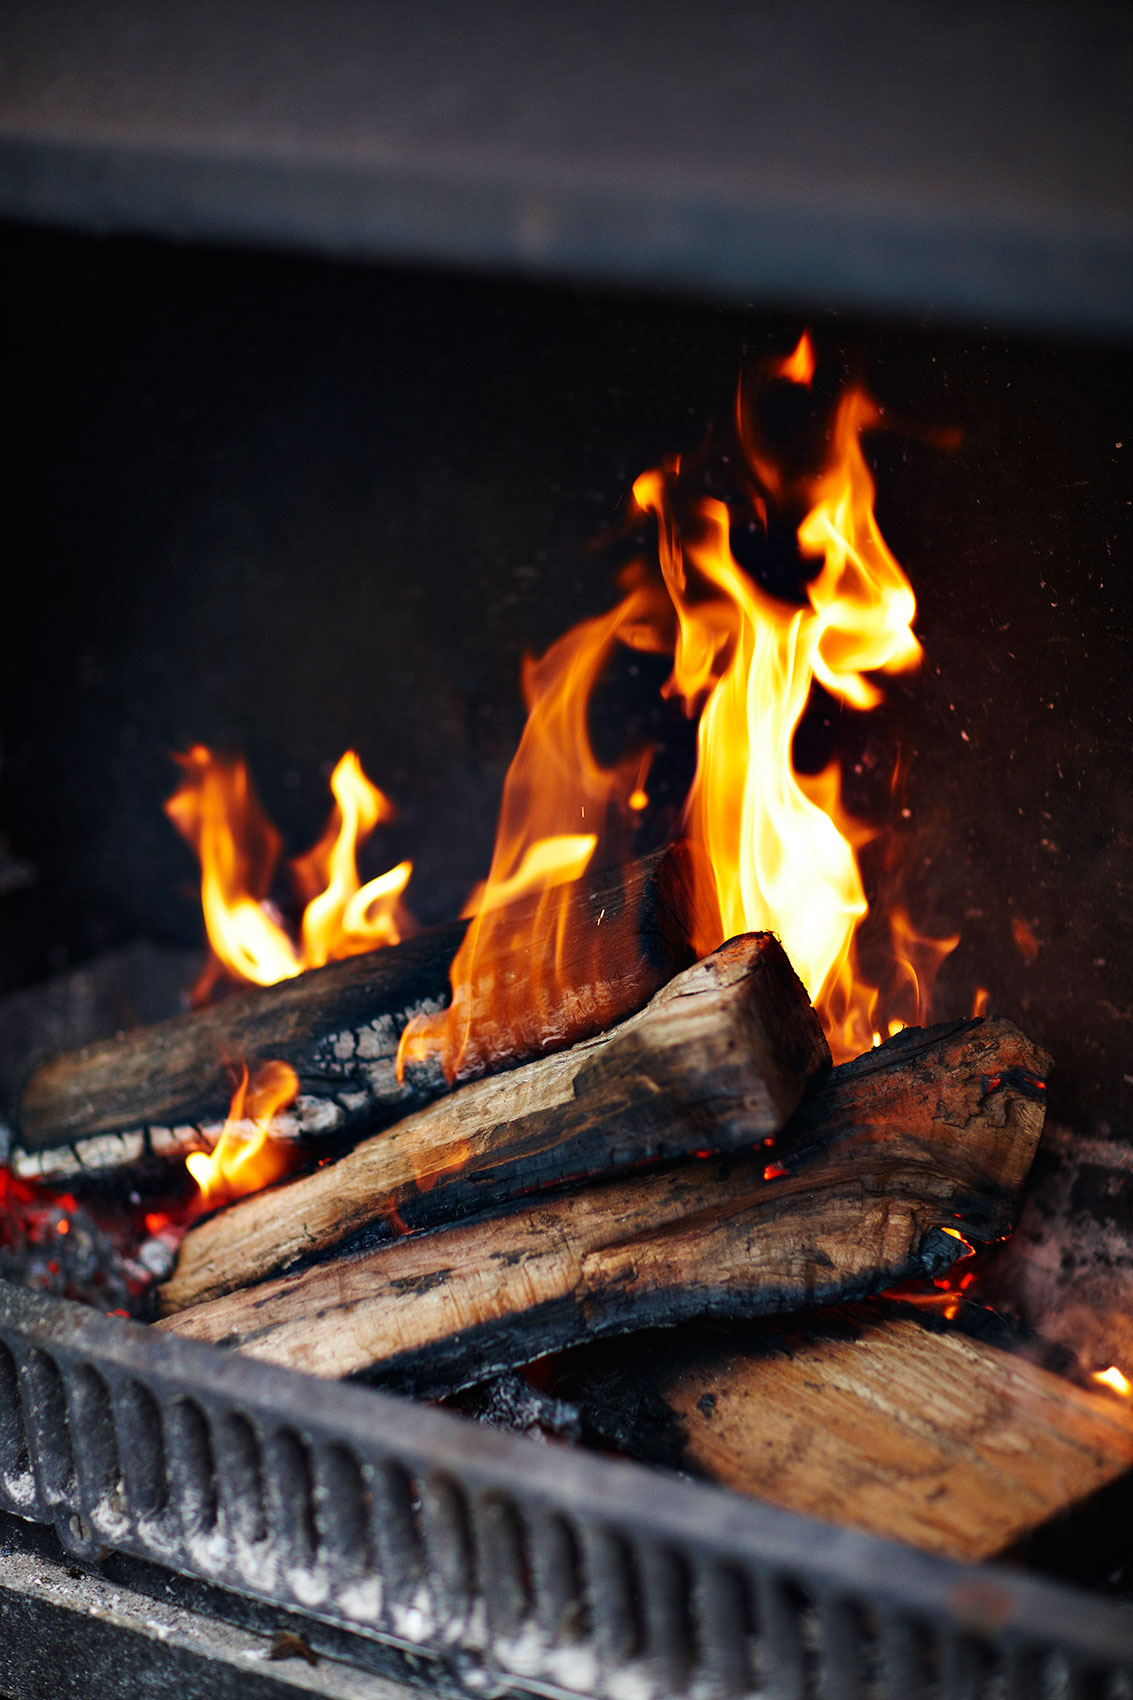 Free Range in the City • Outdoor Wood Fireplace in New Zealand City Home • Cookbook & Lifestyle Food Photography